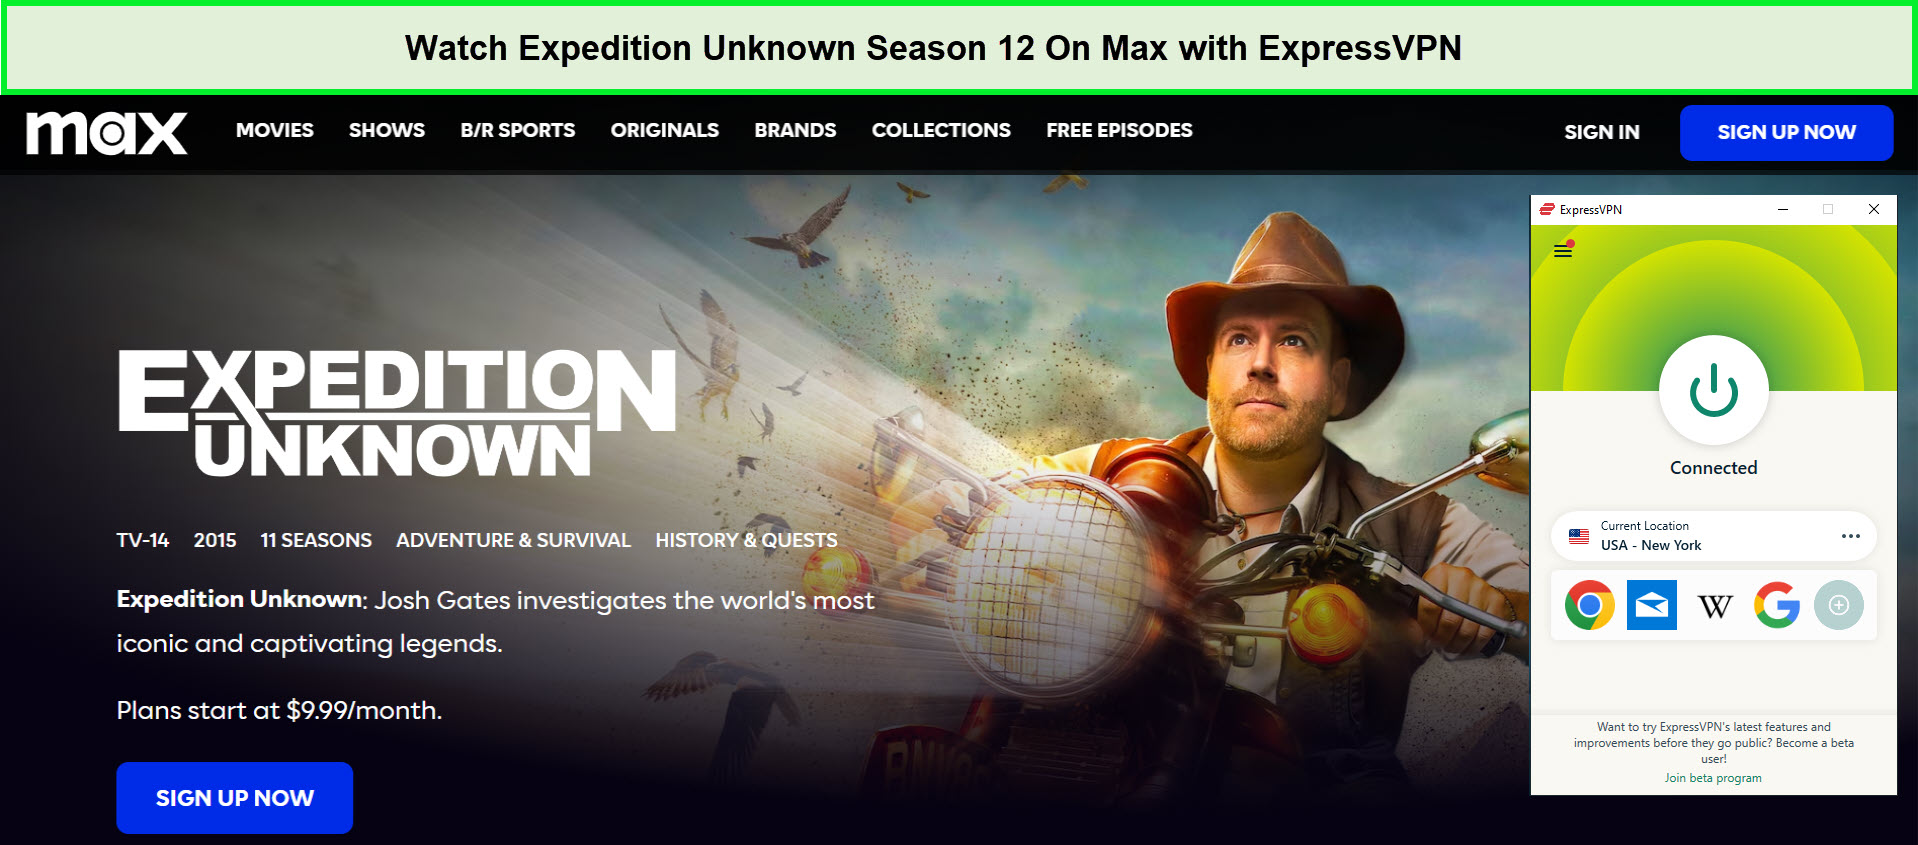 Watch-Expedition-Unknown-Season-12-in-Canada-On-Max-with-ExpressVPN